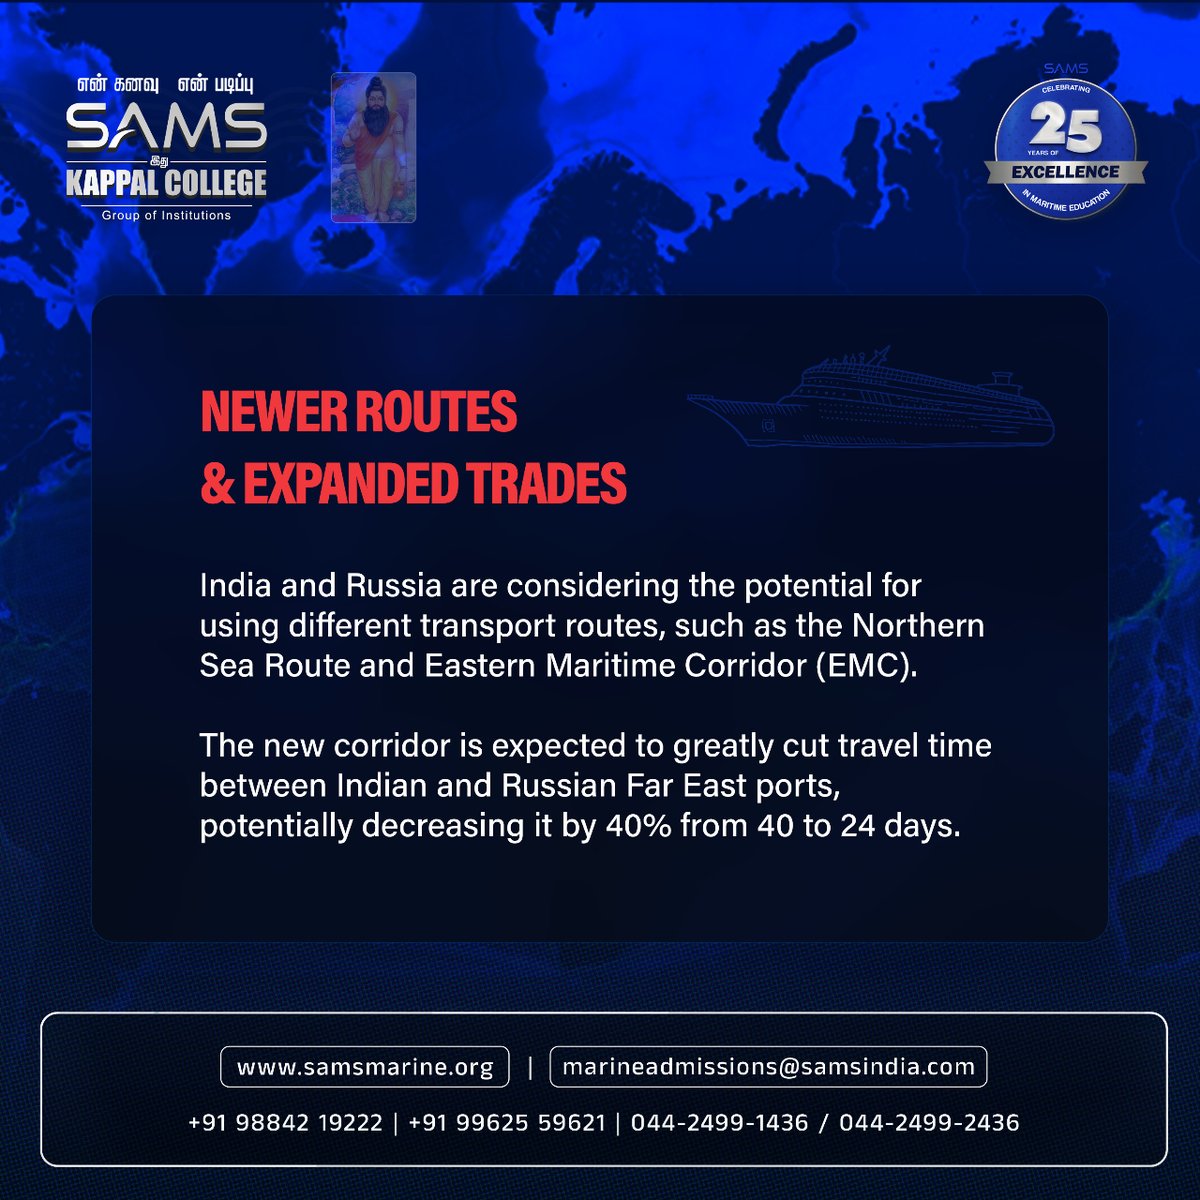 What do you think of this? Comment your views and follow for more Marine insights! #sams #samskappalcollege #marinescience #marinelife #marineinstitute #marineengineering #engineer #aquamarine #marine #marineaquarium #education #engineeringlife #engineeringstudent #shipping